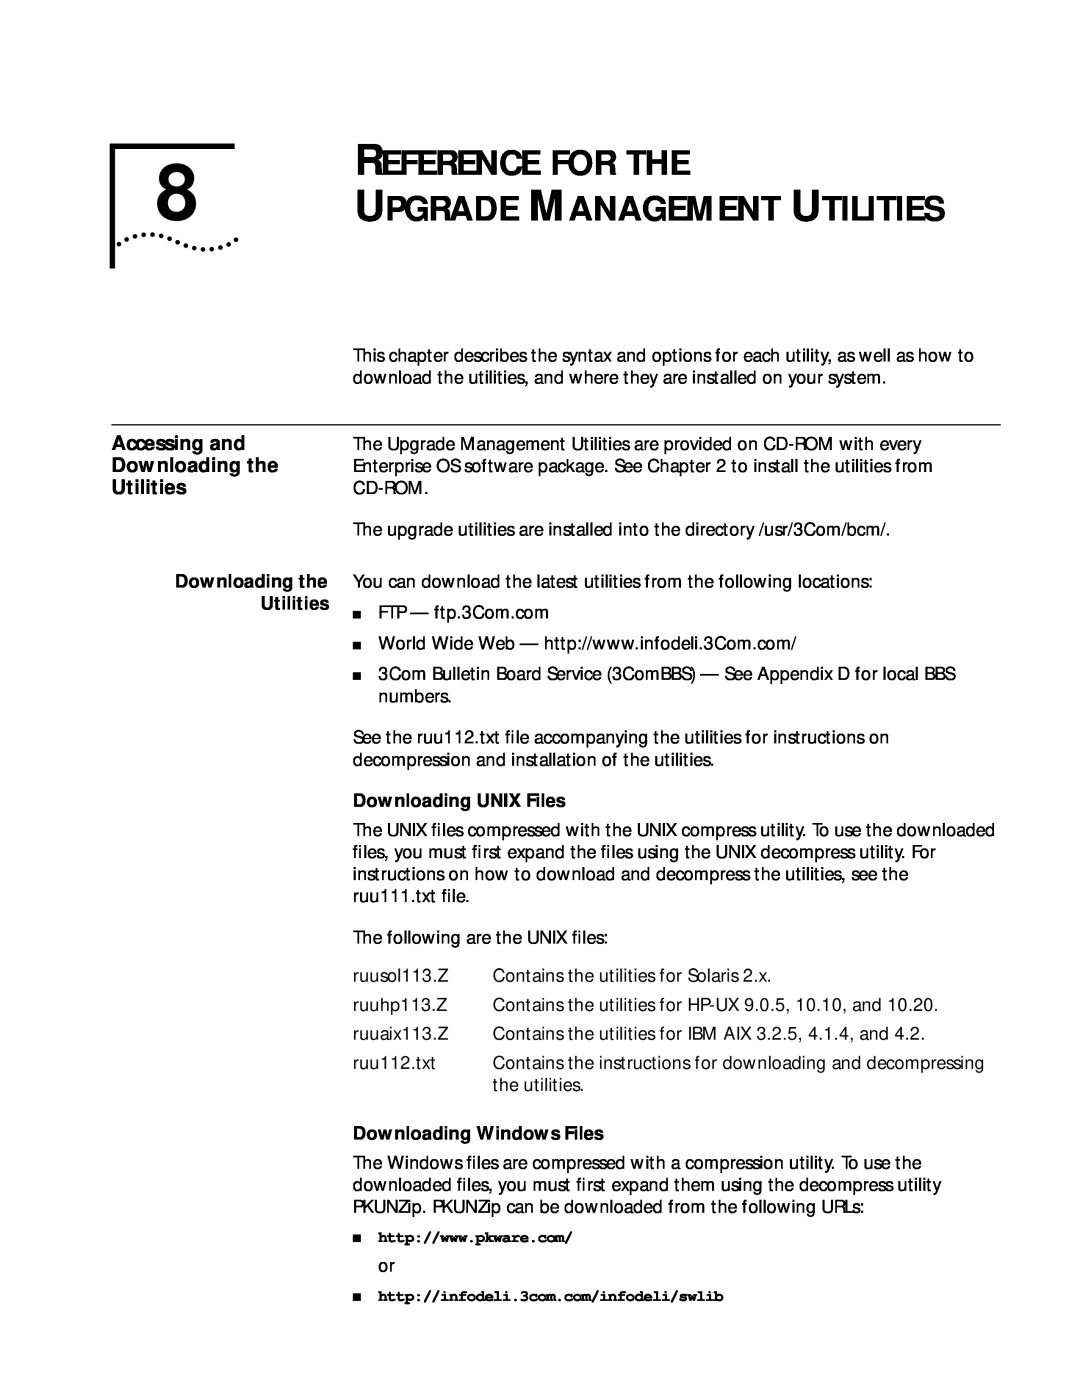 3Com ENTERPRISE OS 11.3 manual REFERENCE FOR THE 8 UPGRADE MANAGEMENT UTILITIES, Accessing and, Downloading the, Utilities 